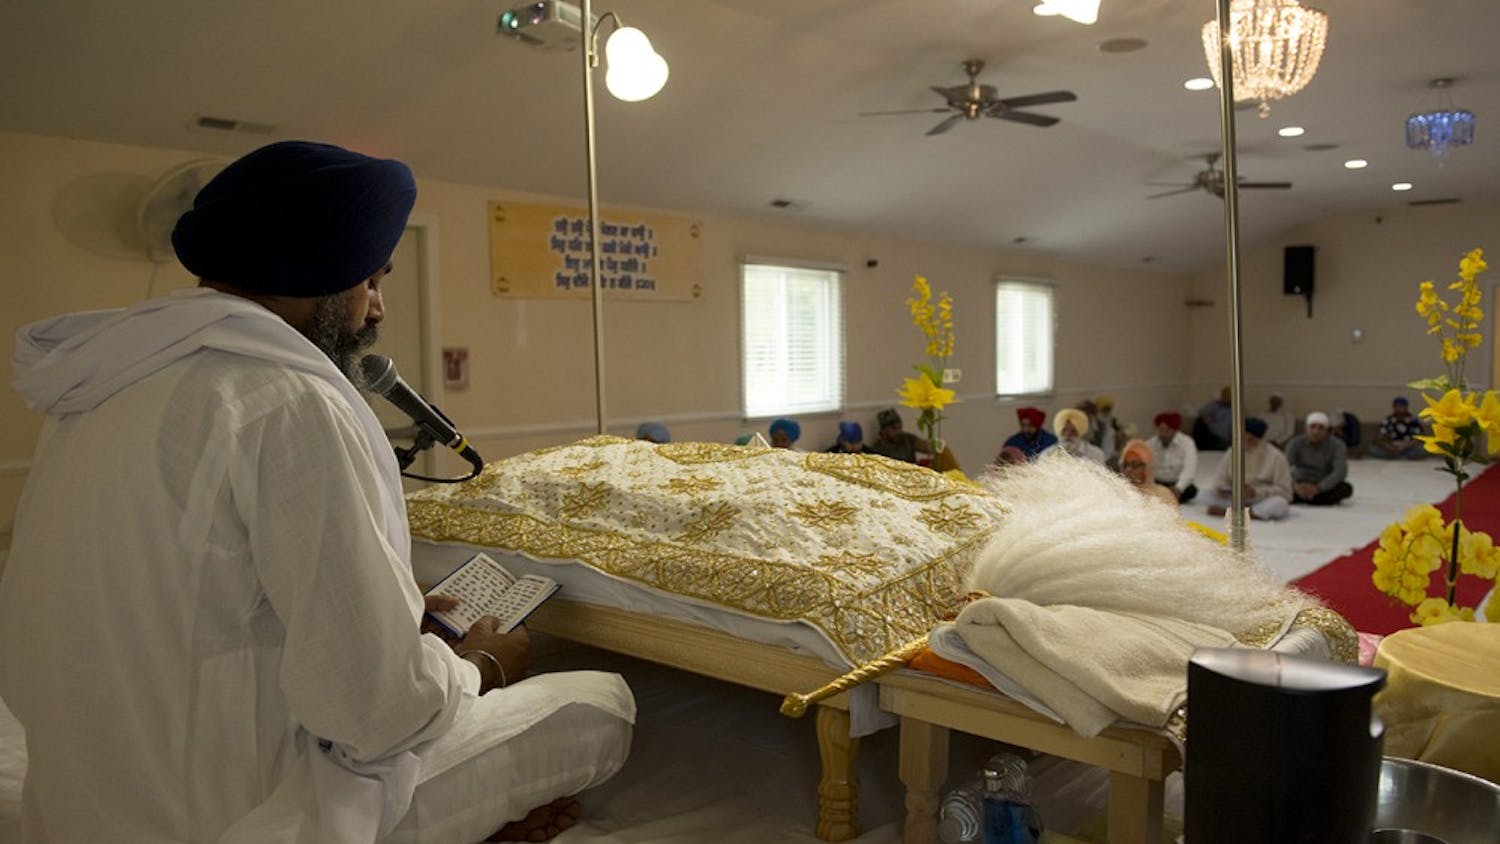 A Sikh priest reading out passages from the Guru Granth Sahib, a Holy Book, to a congregation in Fishers, Ind.